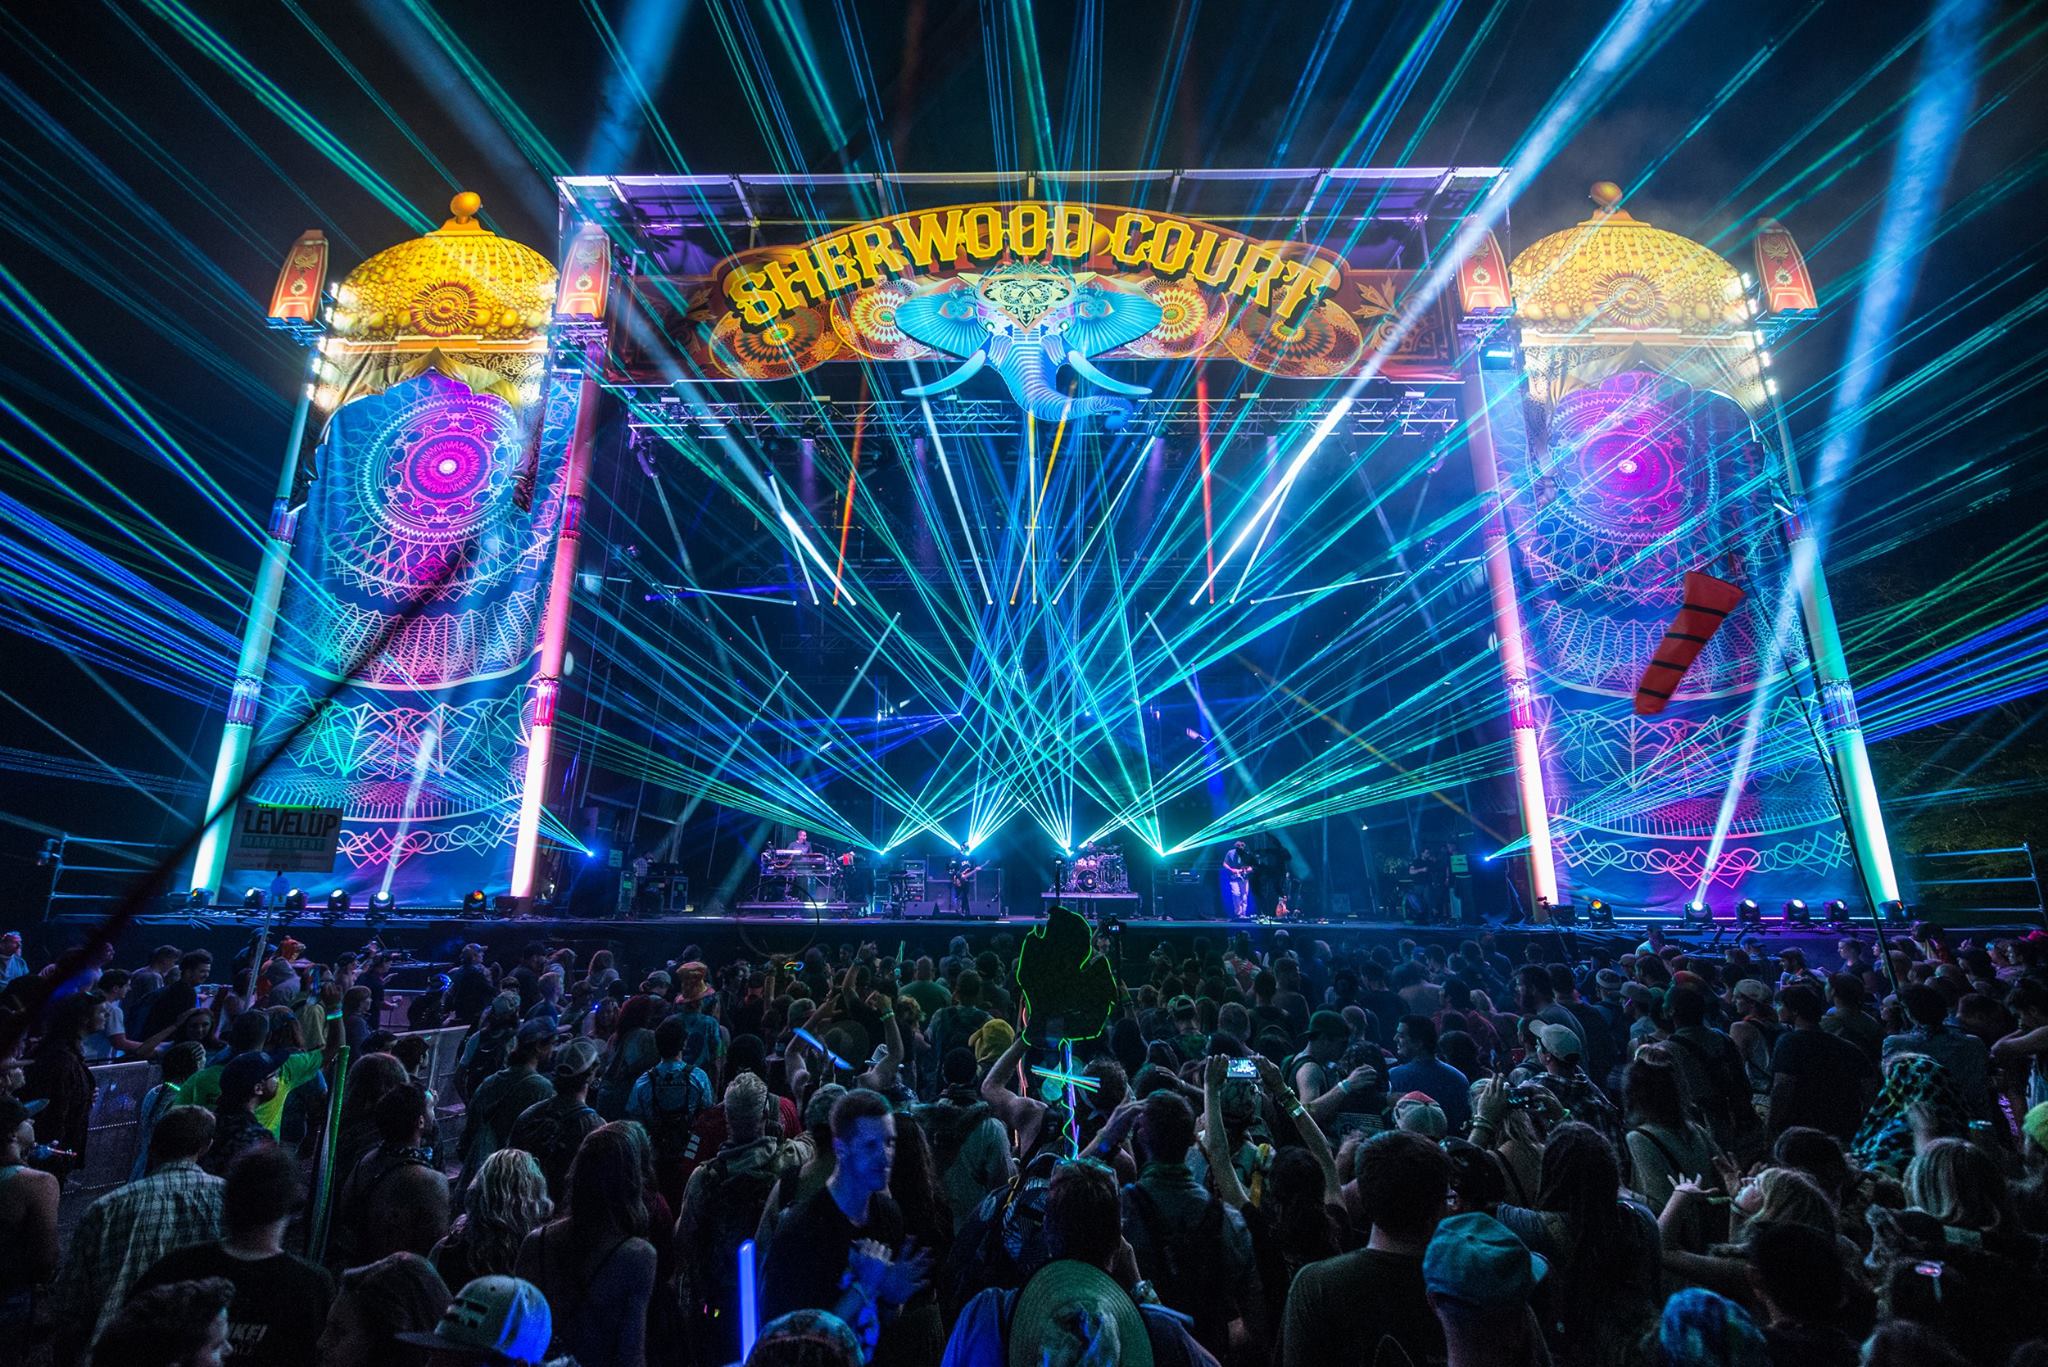 Image courtesy of Electric Forest Festival